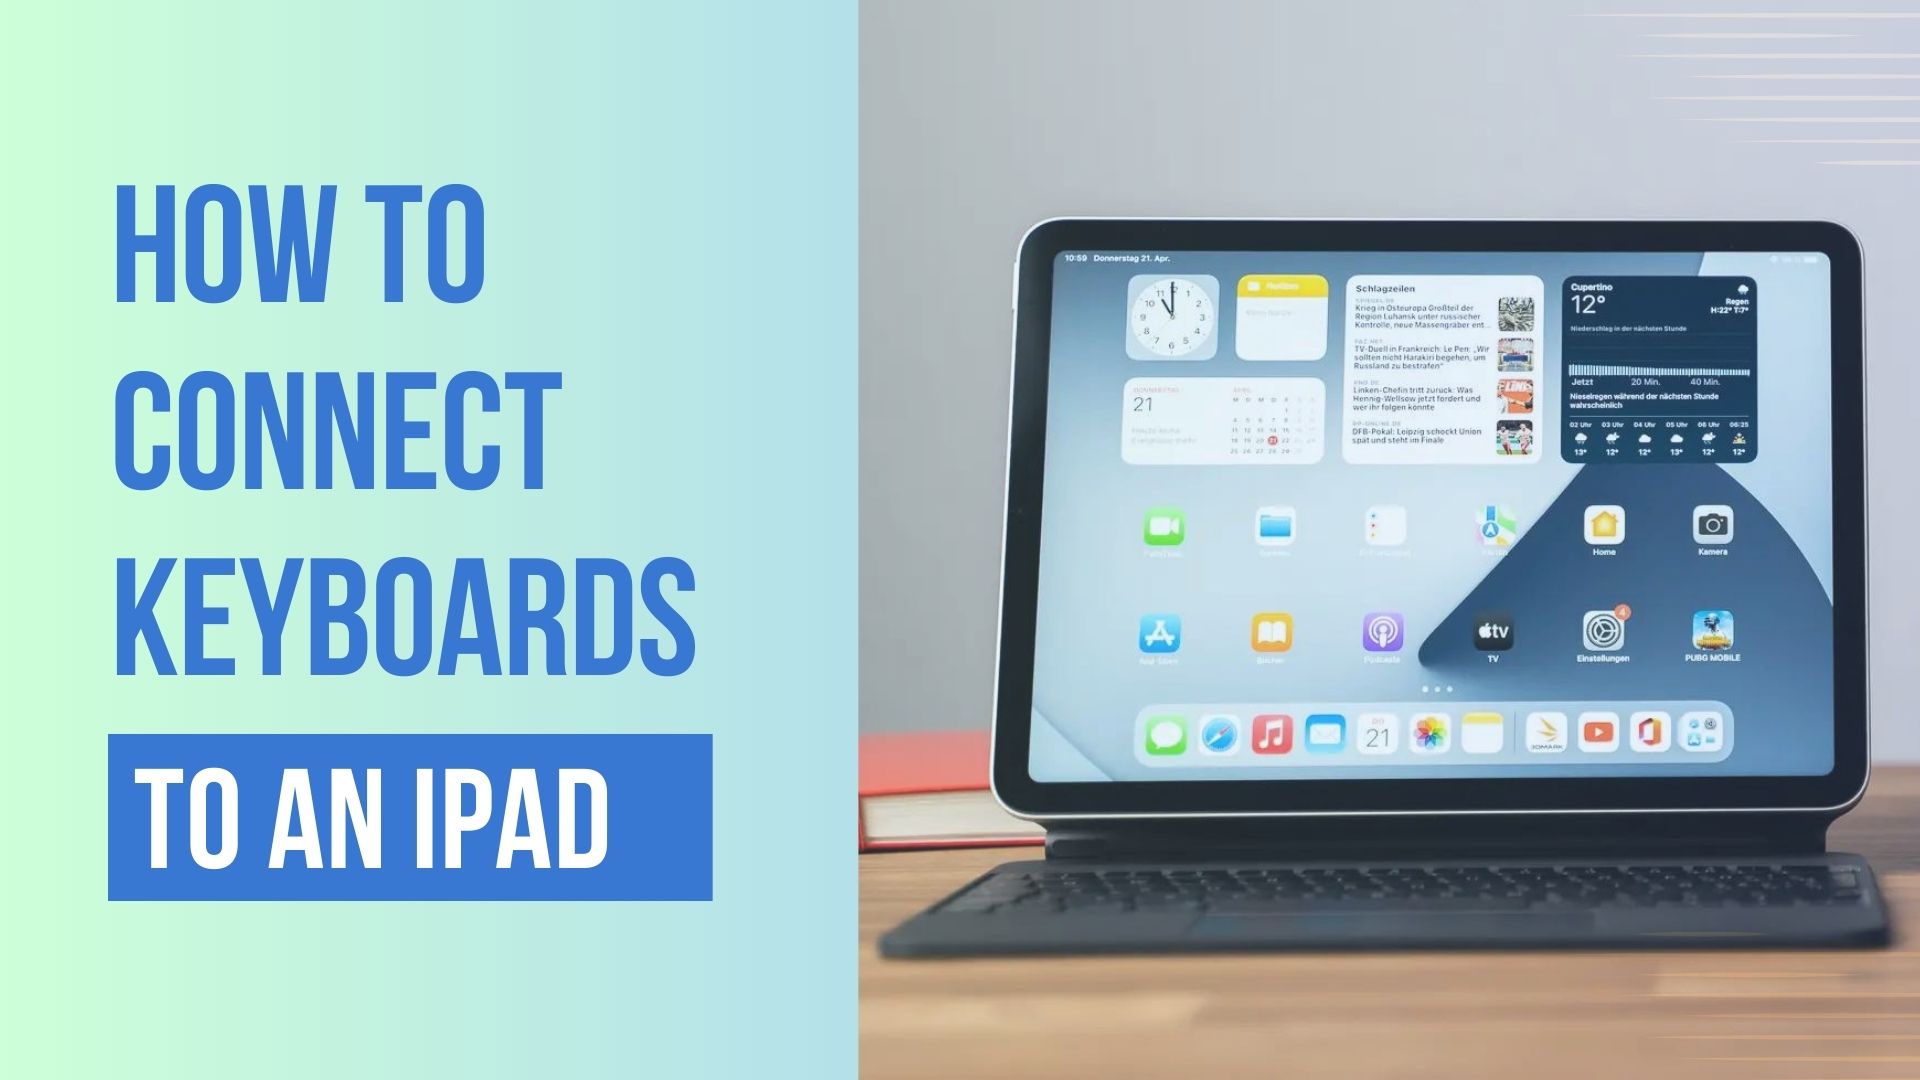 How To Connect Keyboards To Your iPad